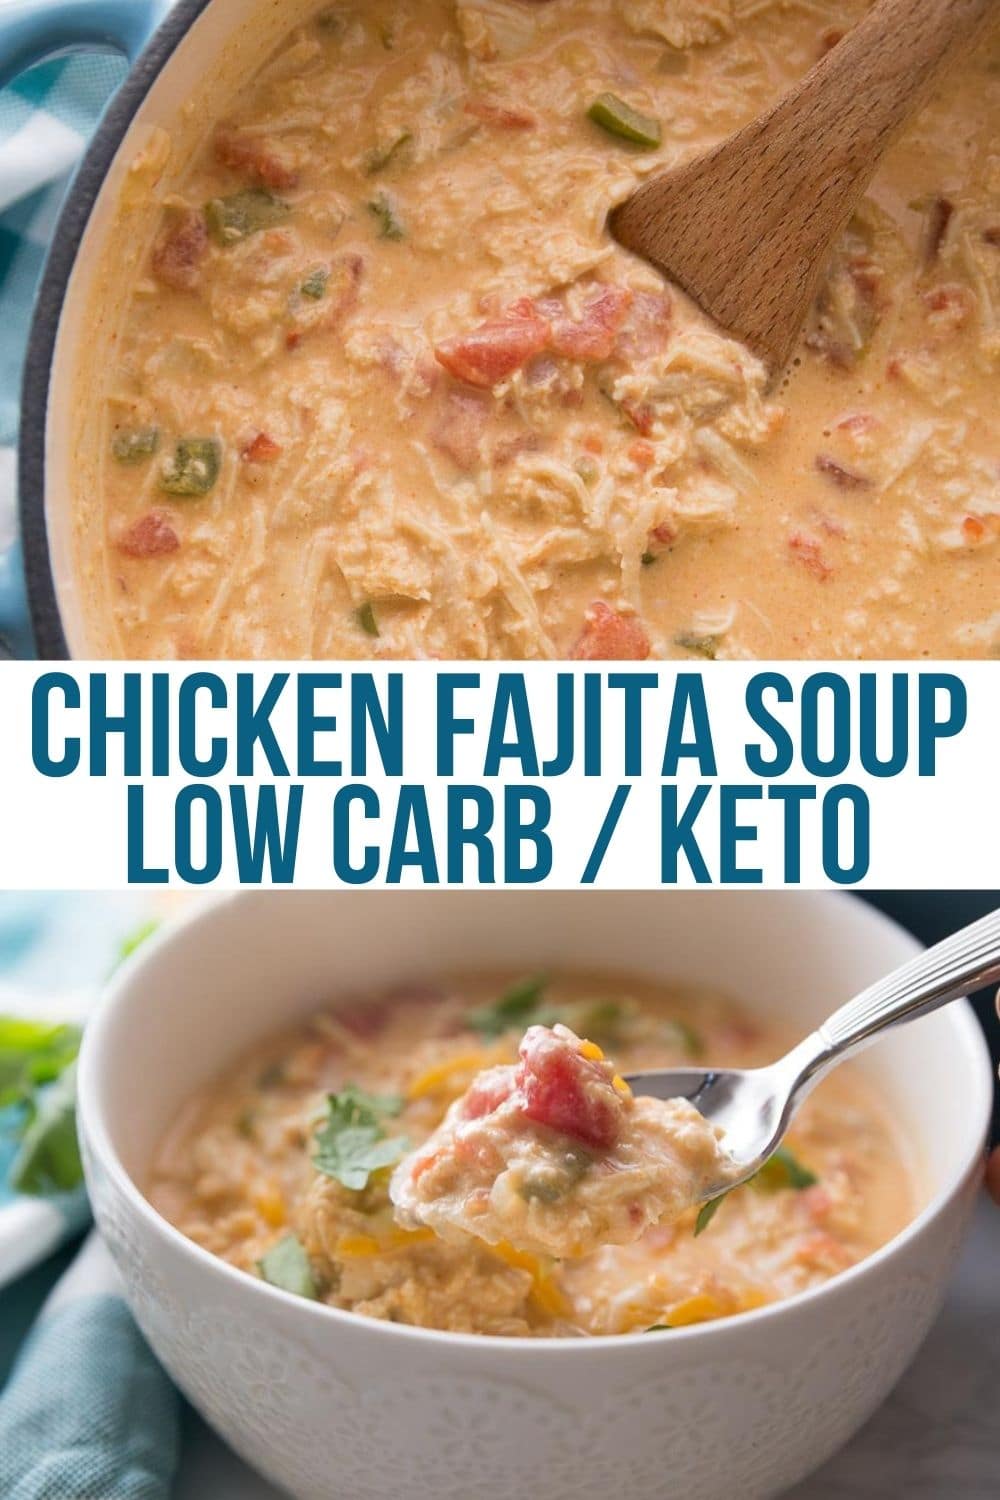 low carb chicken fajita soup in a bowl/pot with a spoon.